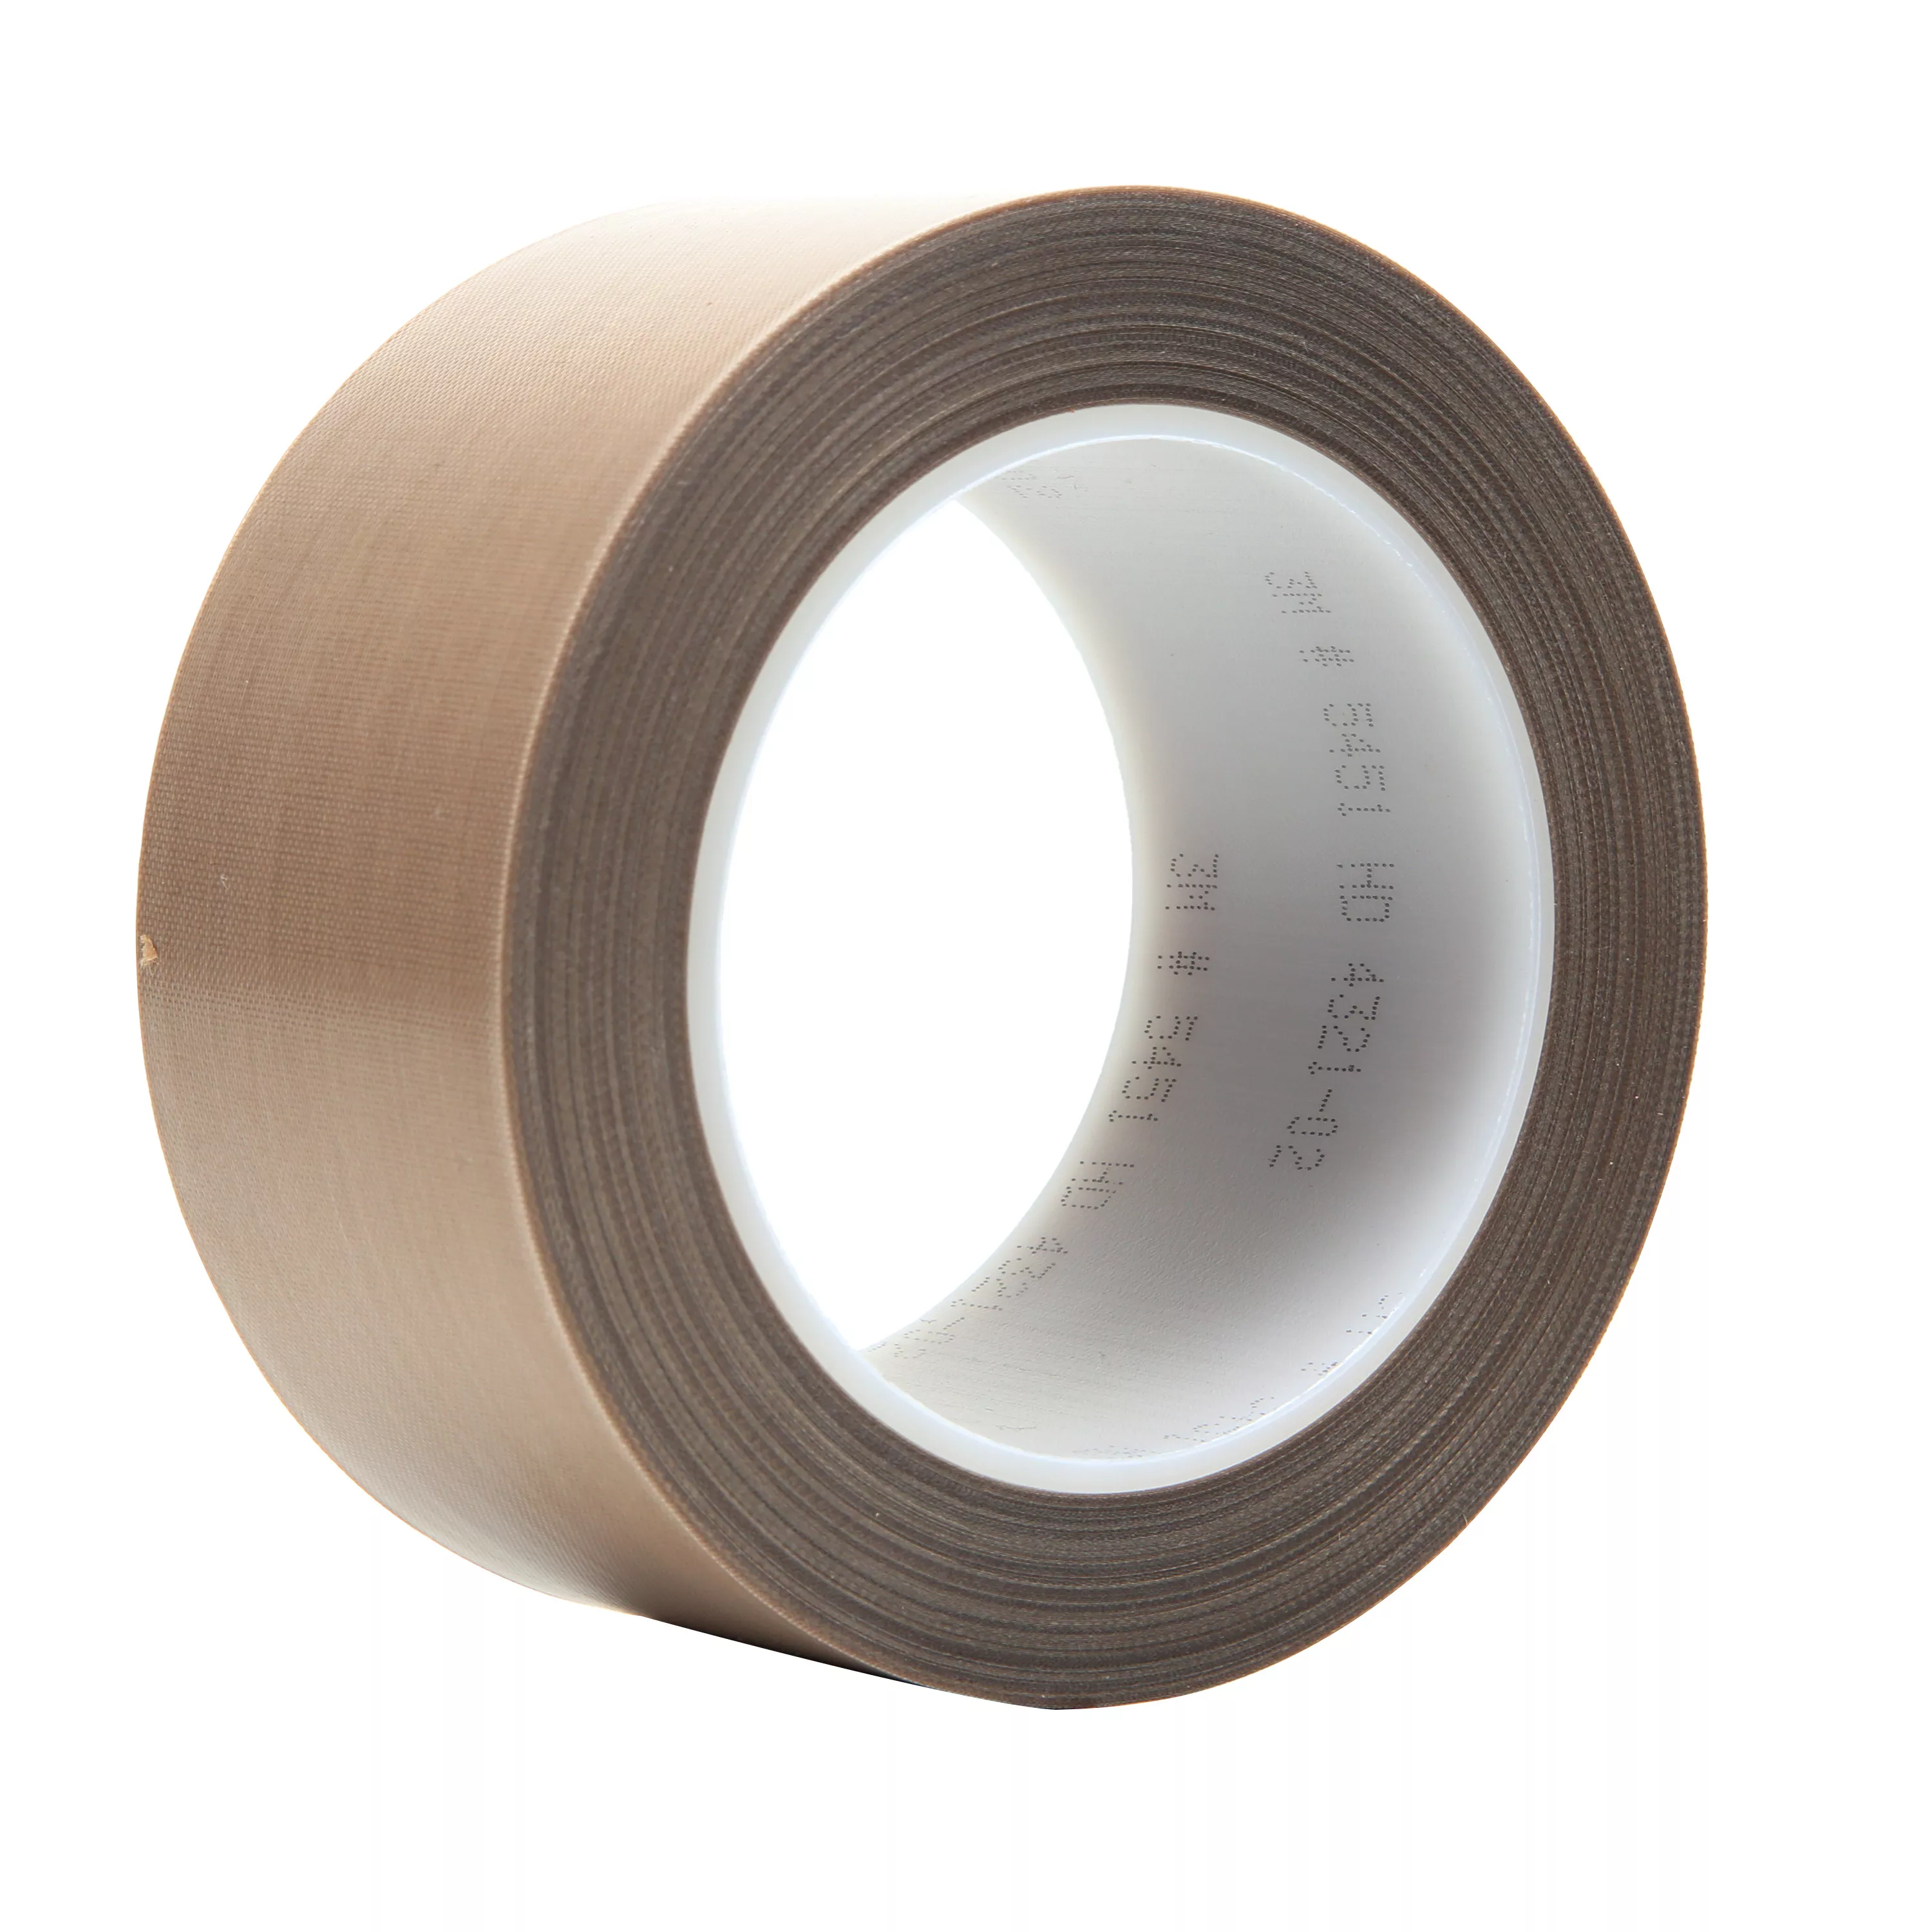 3M™ PTFE Glass Cloth Tape 5451, Brown, 4 in x 36 yd, 5.6 mil, 3
Roll/Case